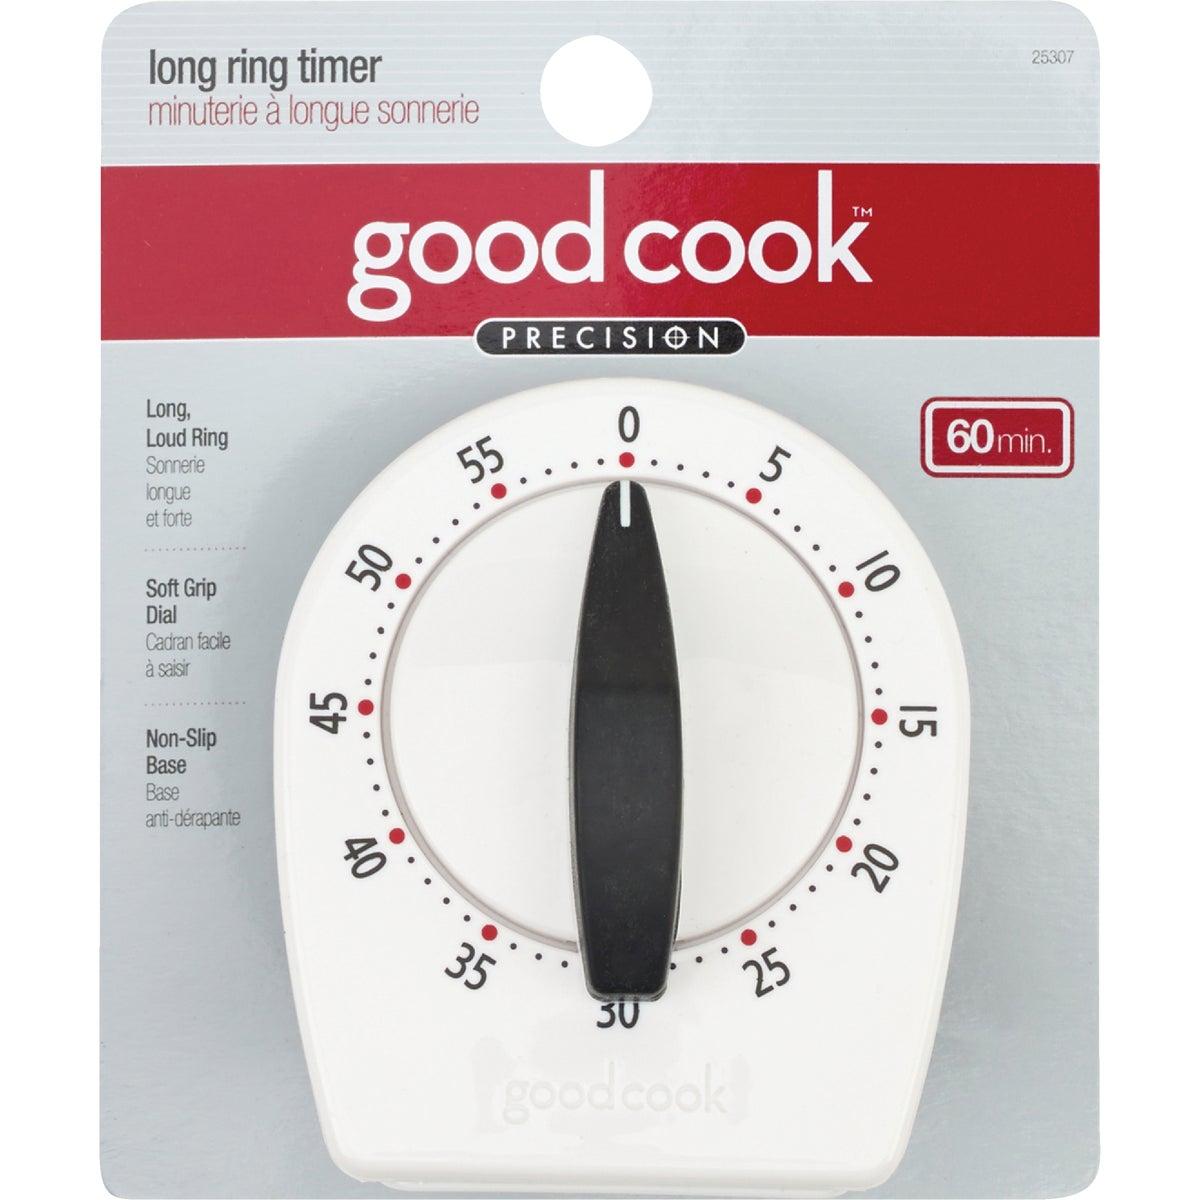 Item 626393, 60-minute long ring timer has a soft dial grip and non-slip base.